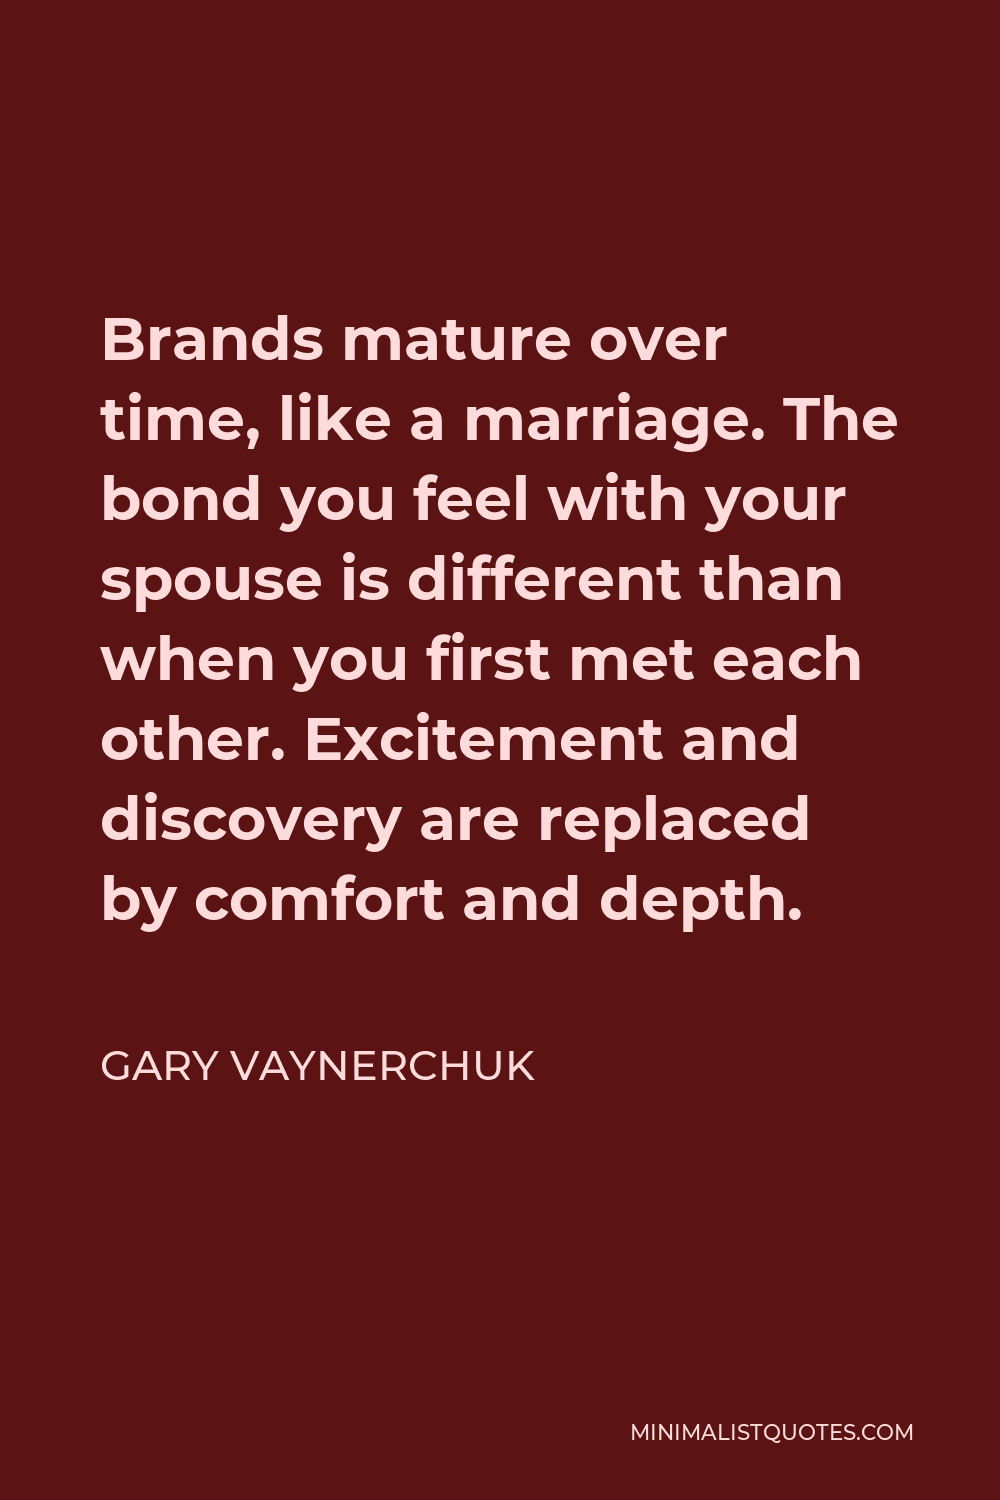 Gary Vaynerchuk Quote - Brands mature over time, like a marriage. The bond you feel with your spouse is different than when you first met each other. Excitement and discovery are replaced by comfort and depth.